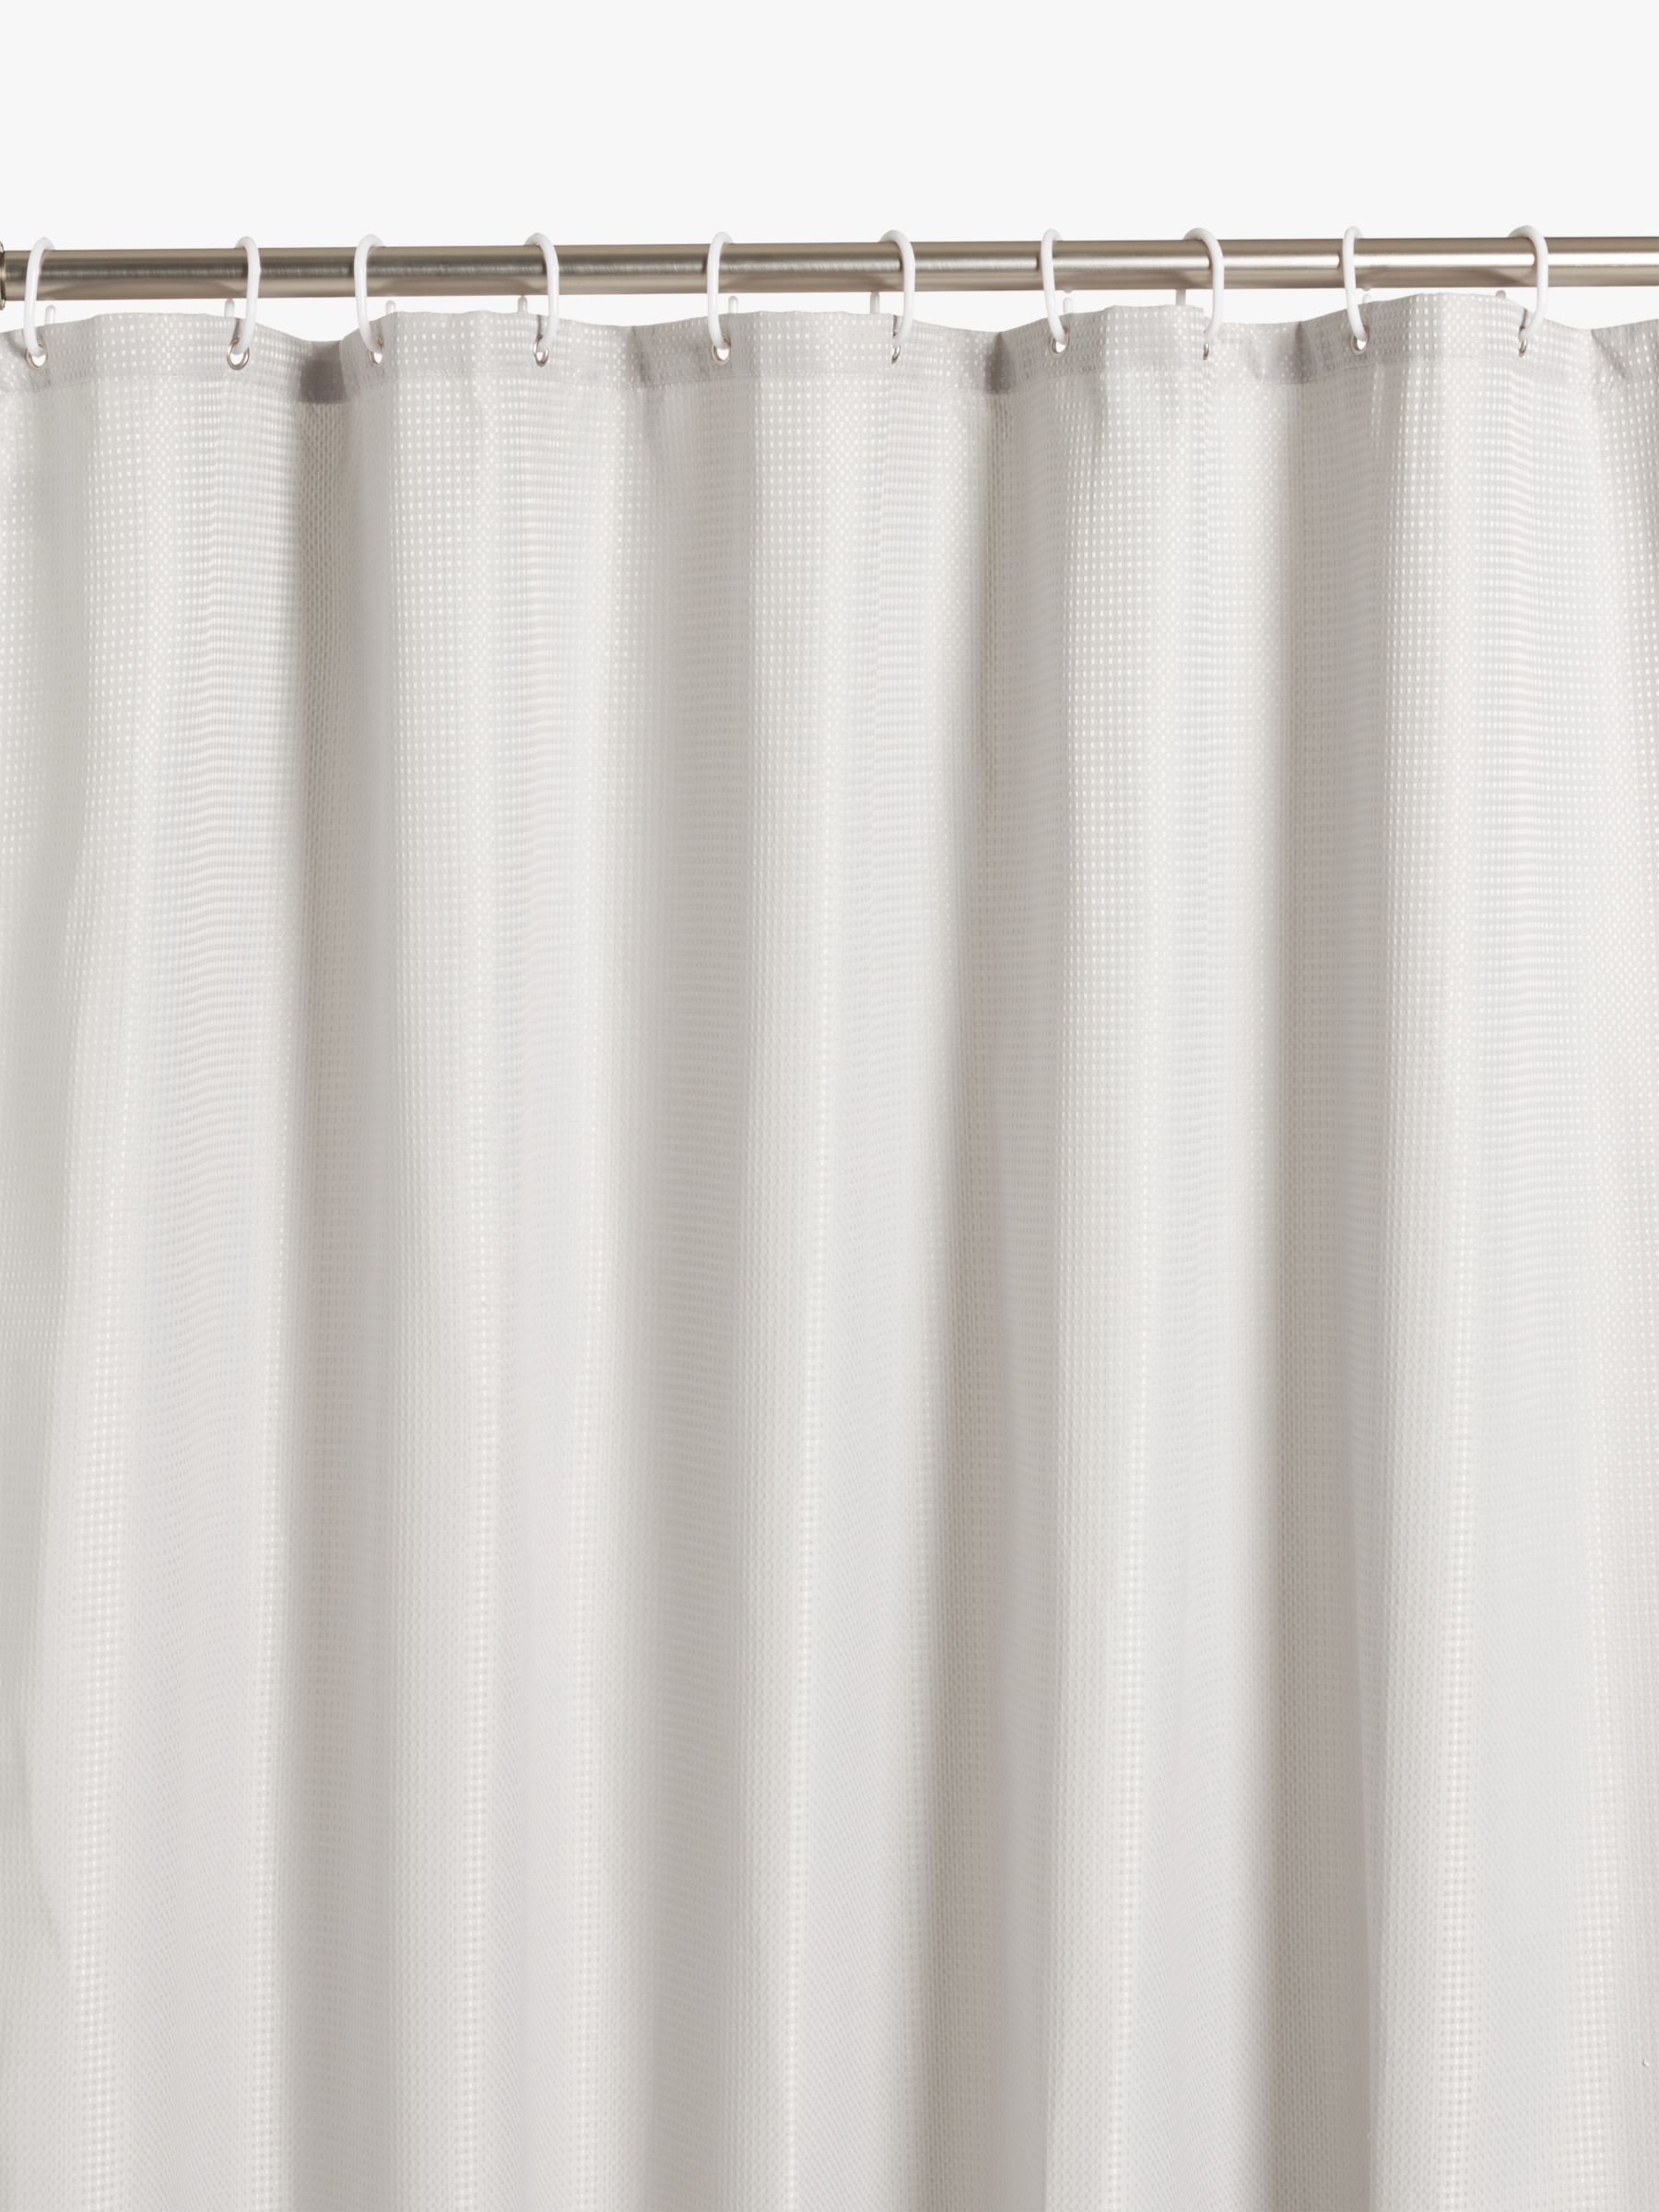 John Lewis Textured Waffle Recycled Polyester Shower Curtain, Grey